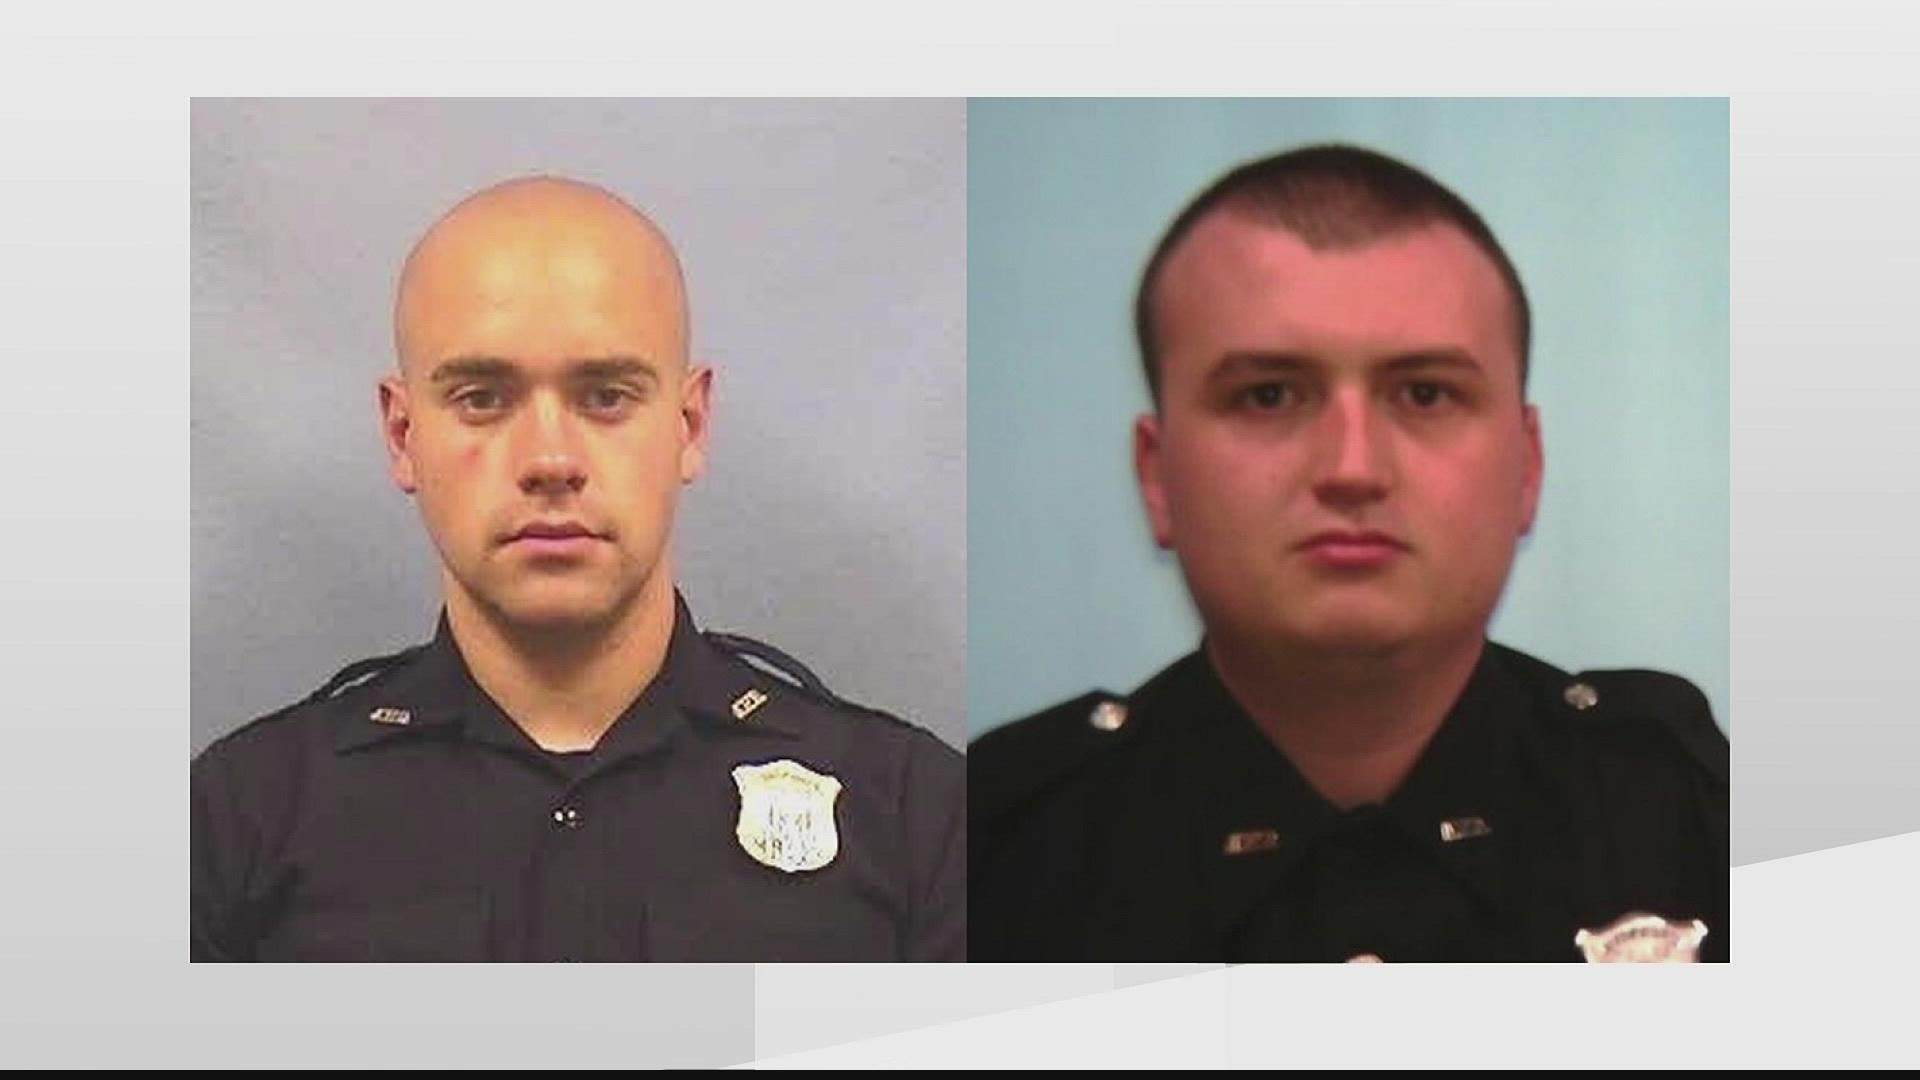 The prosecutor said he was not sure about next steps for the two officers: Garrett Rolfe and Devin Brosnan